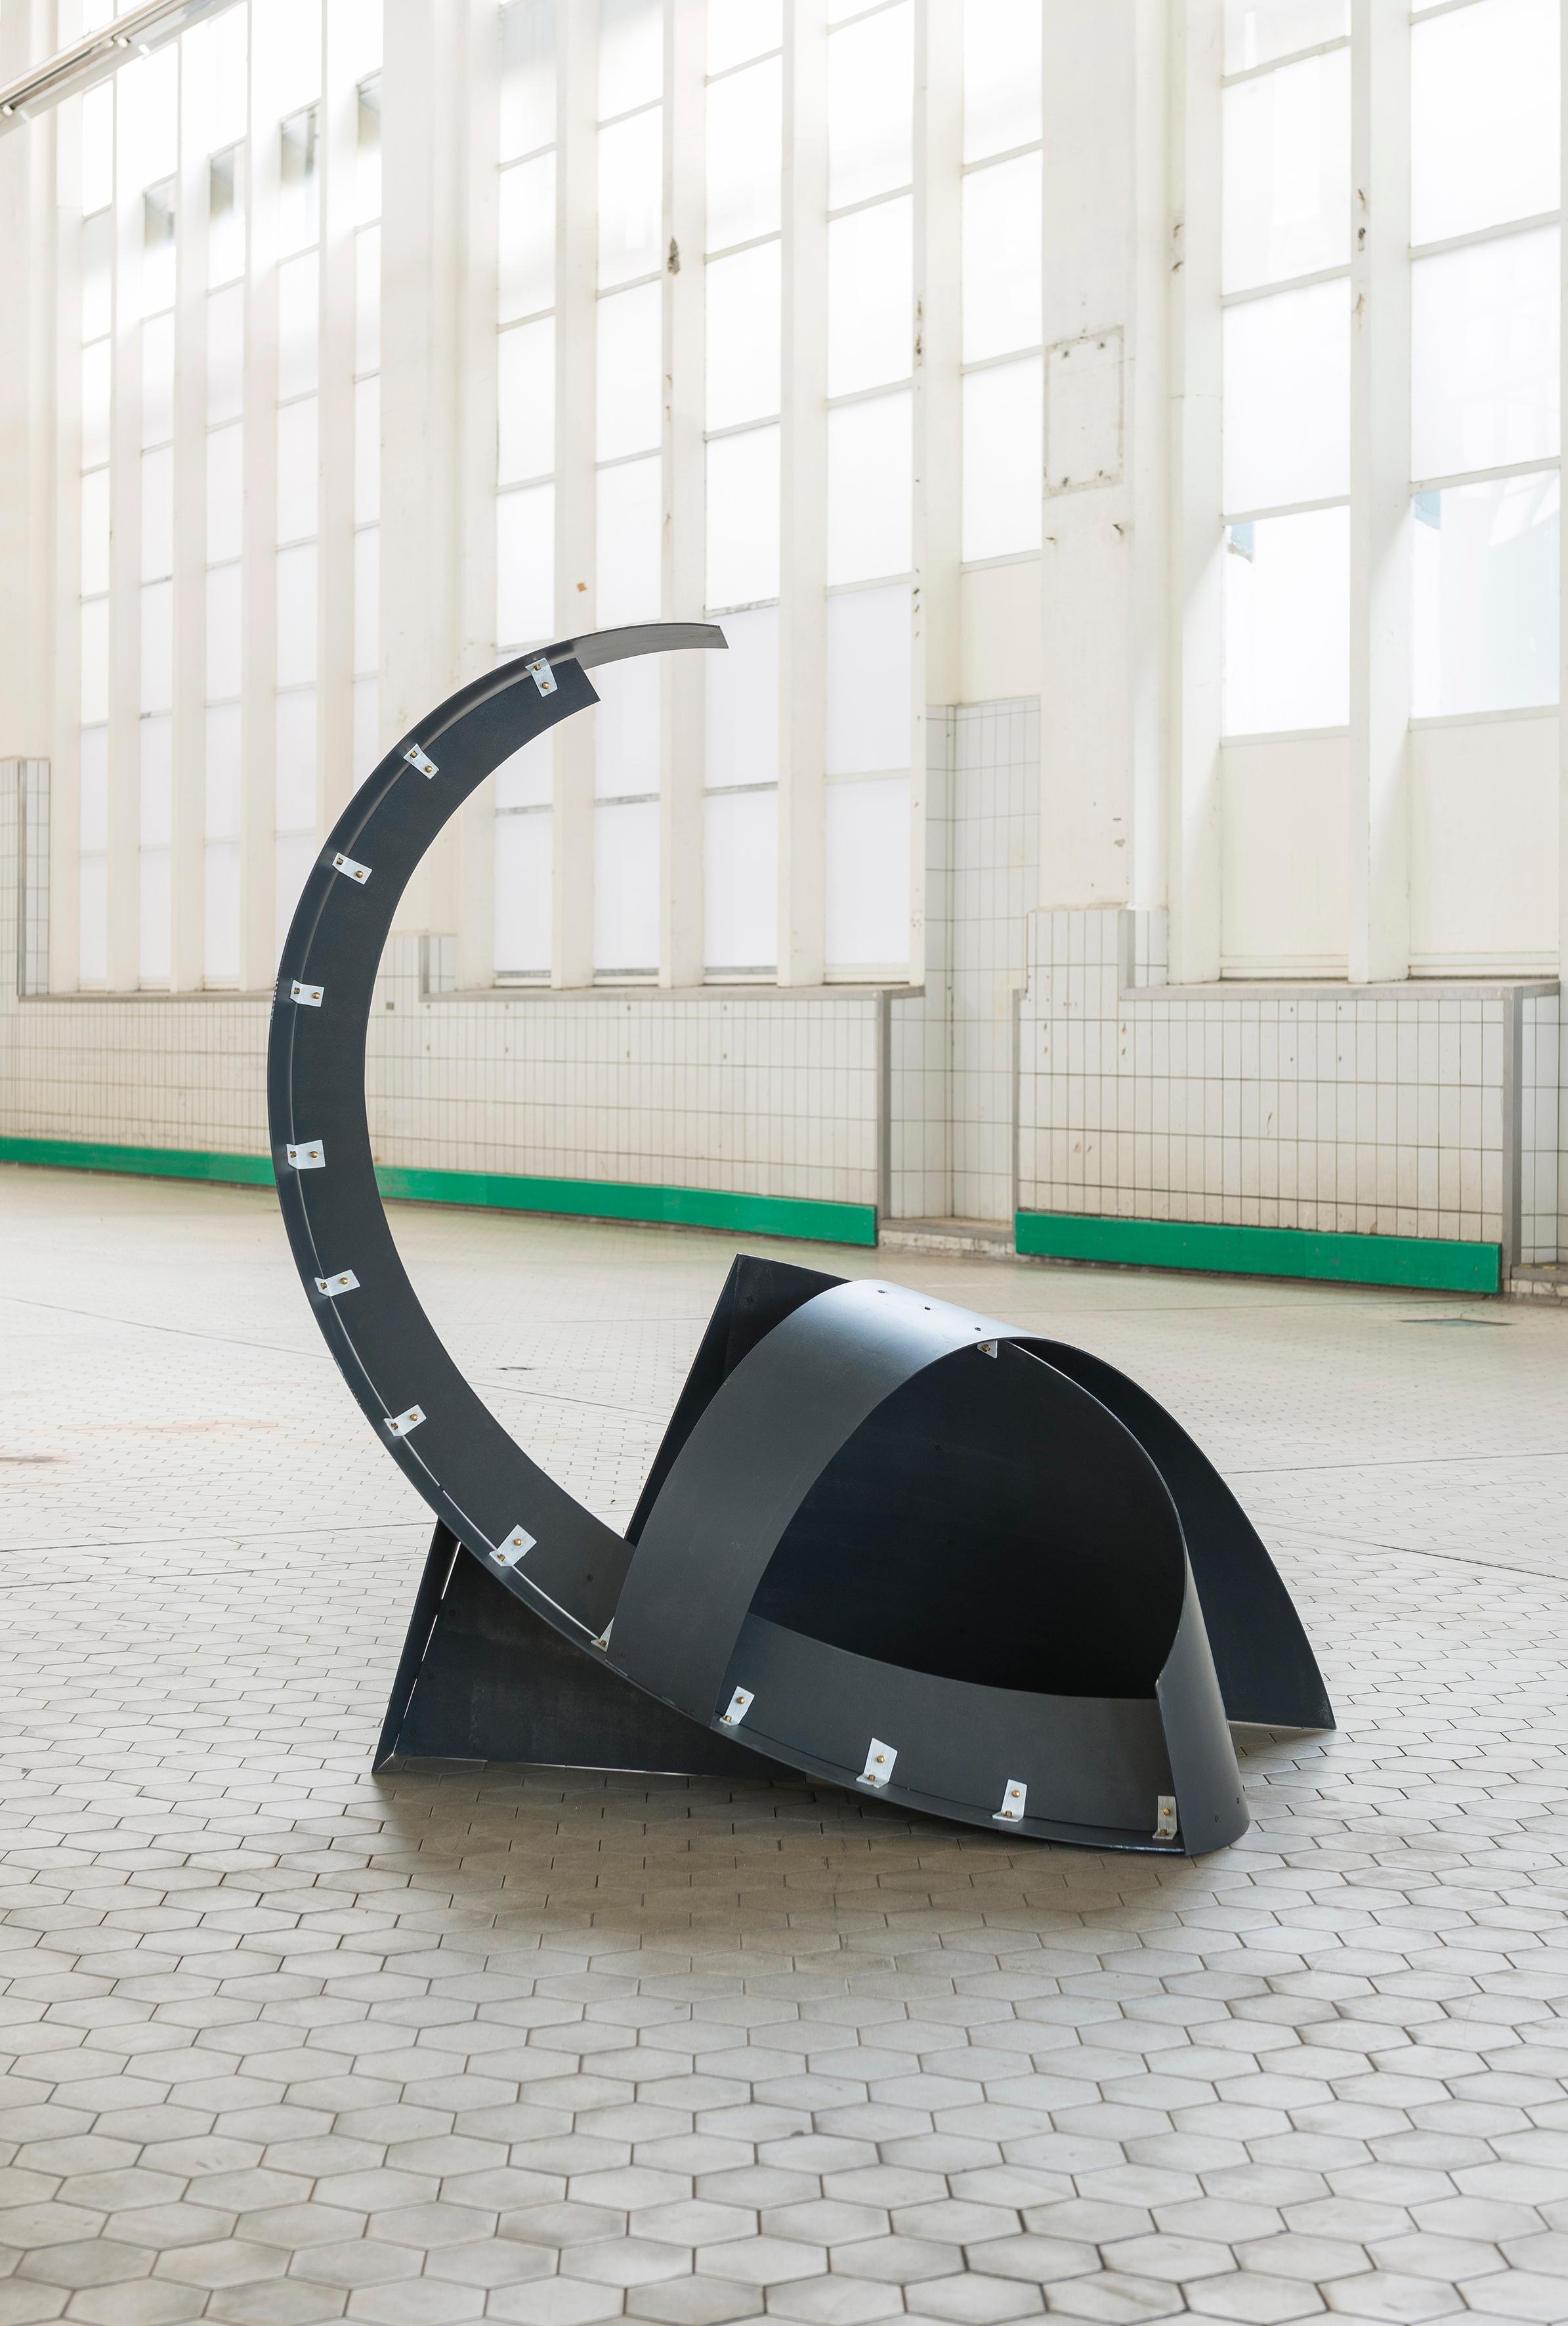 Curved and taped is a collection of sculptural forms that push the boundaries of architecture, art and design. The project is the result of an expressive gesture that moves away from just answering to functionality, focusing on shaping and building,